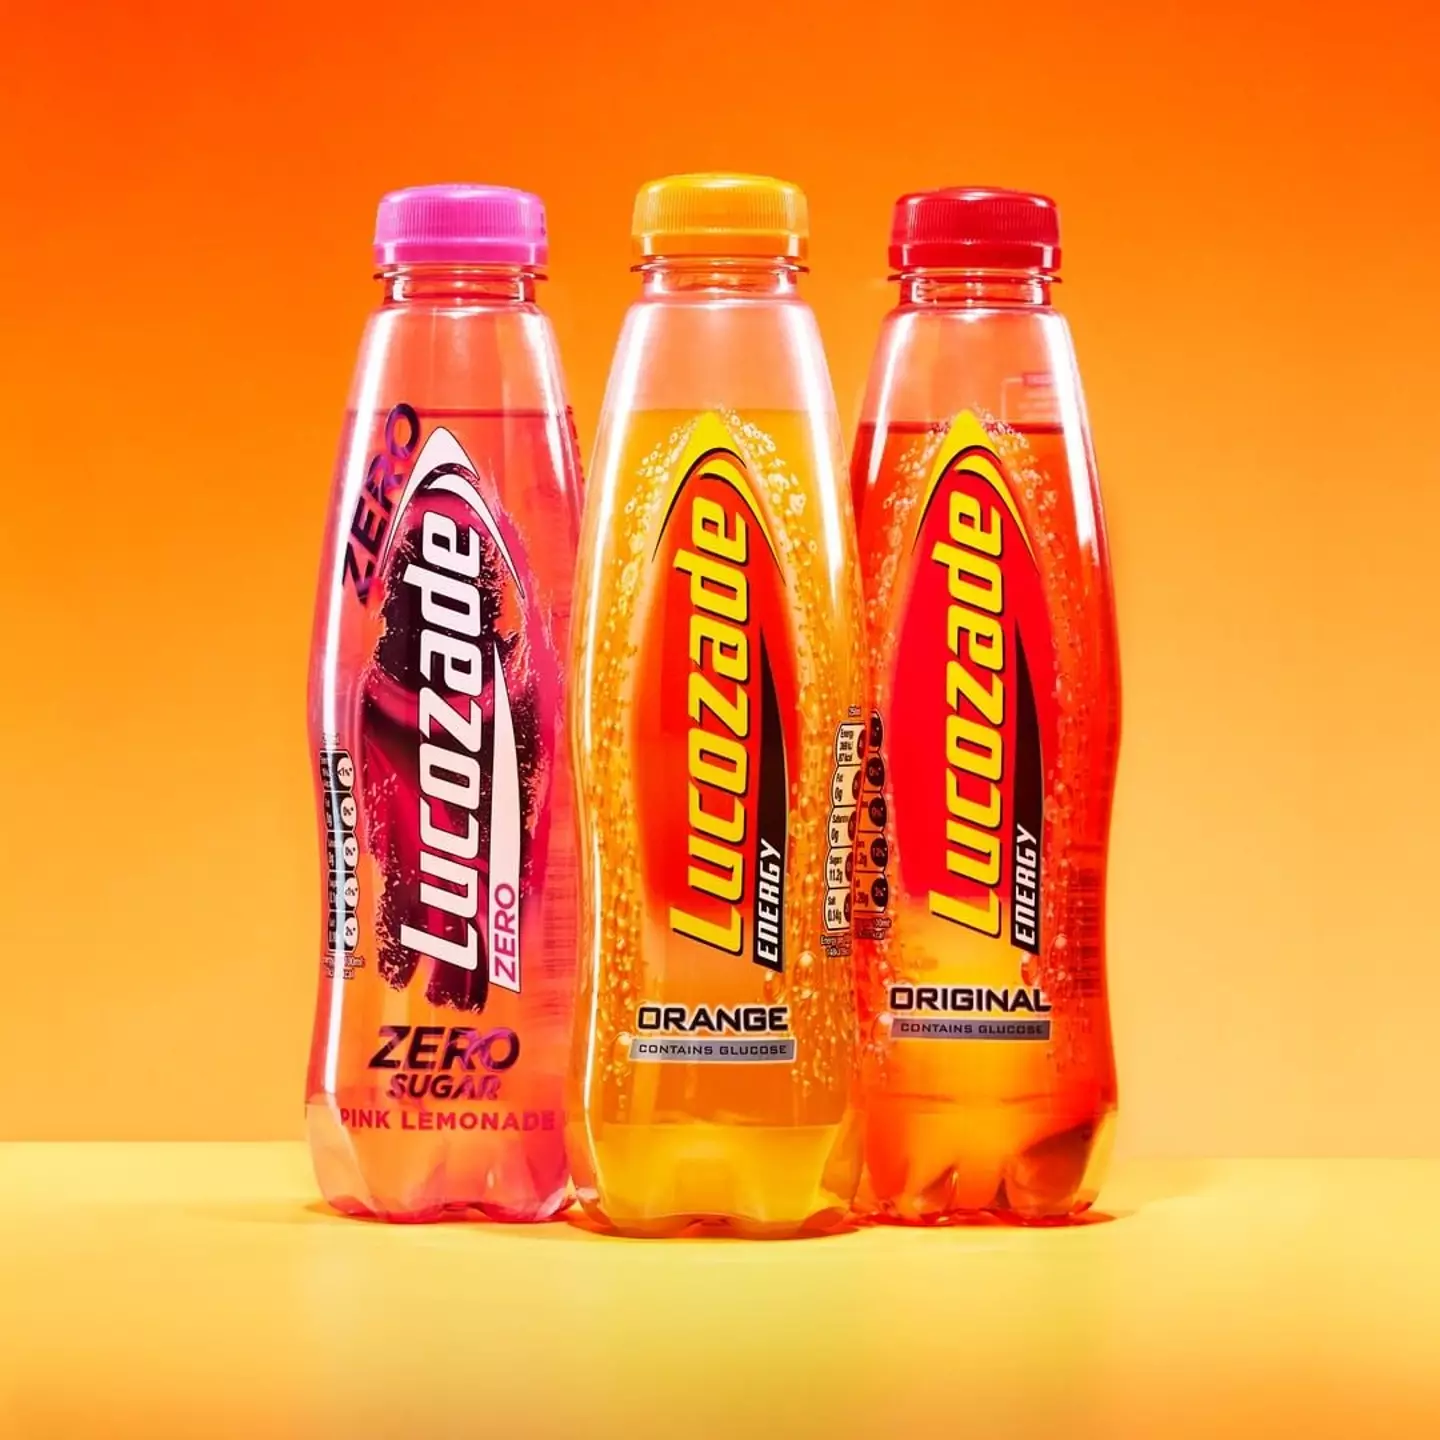 How Lucozade bottles used to look.